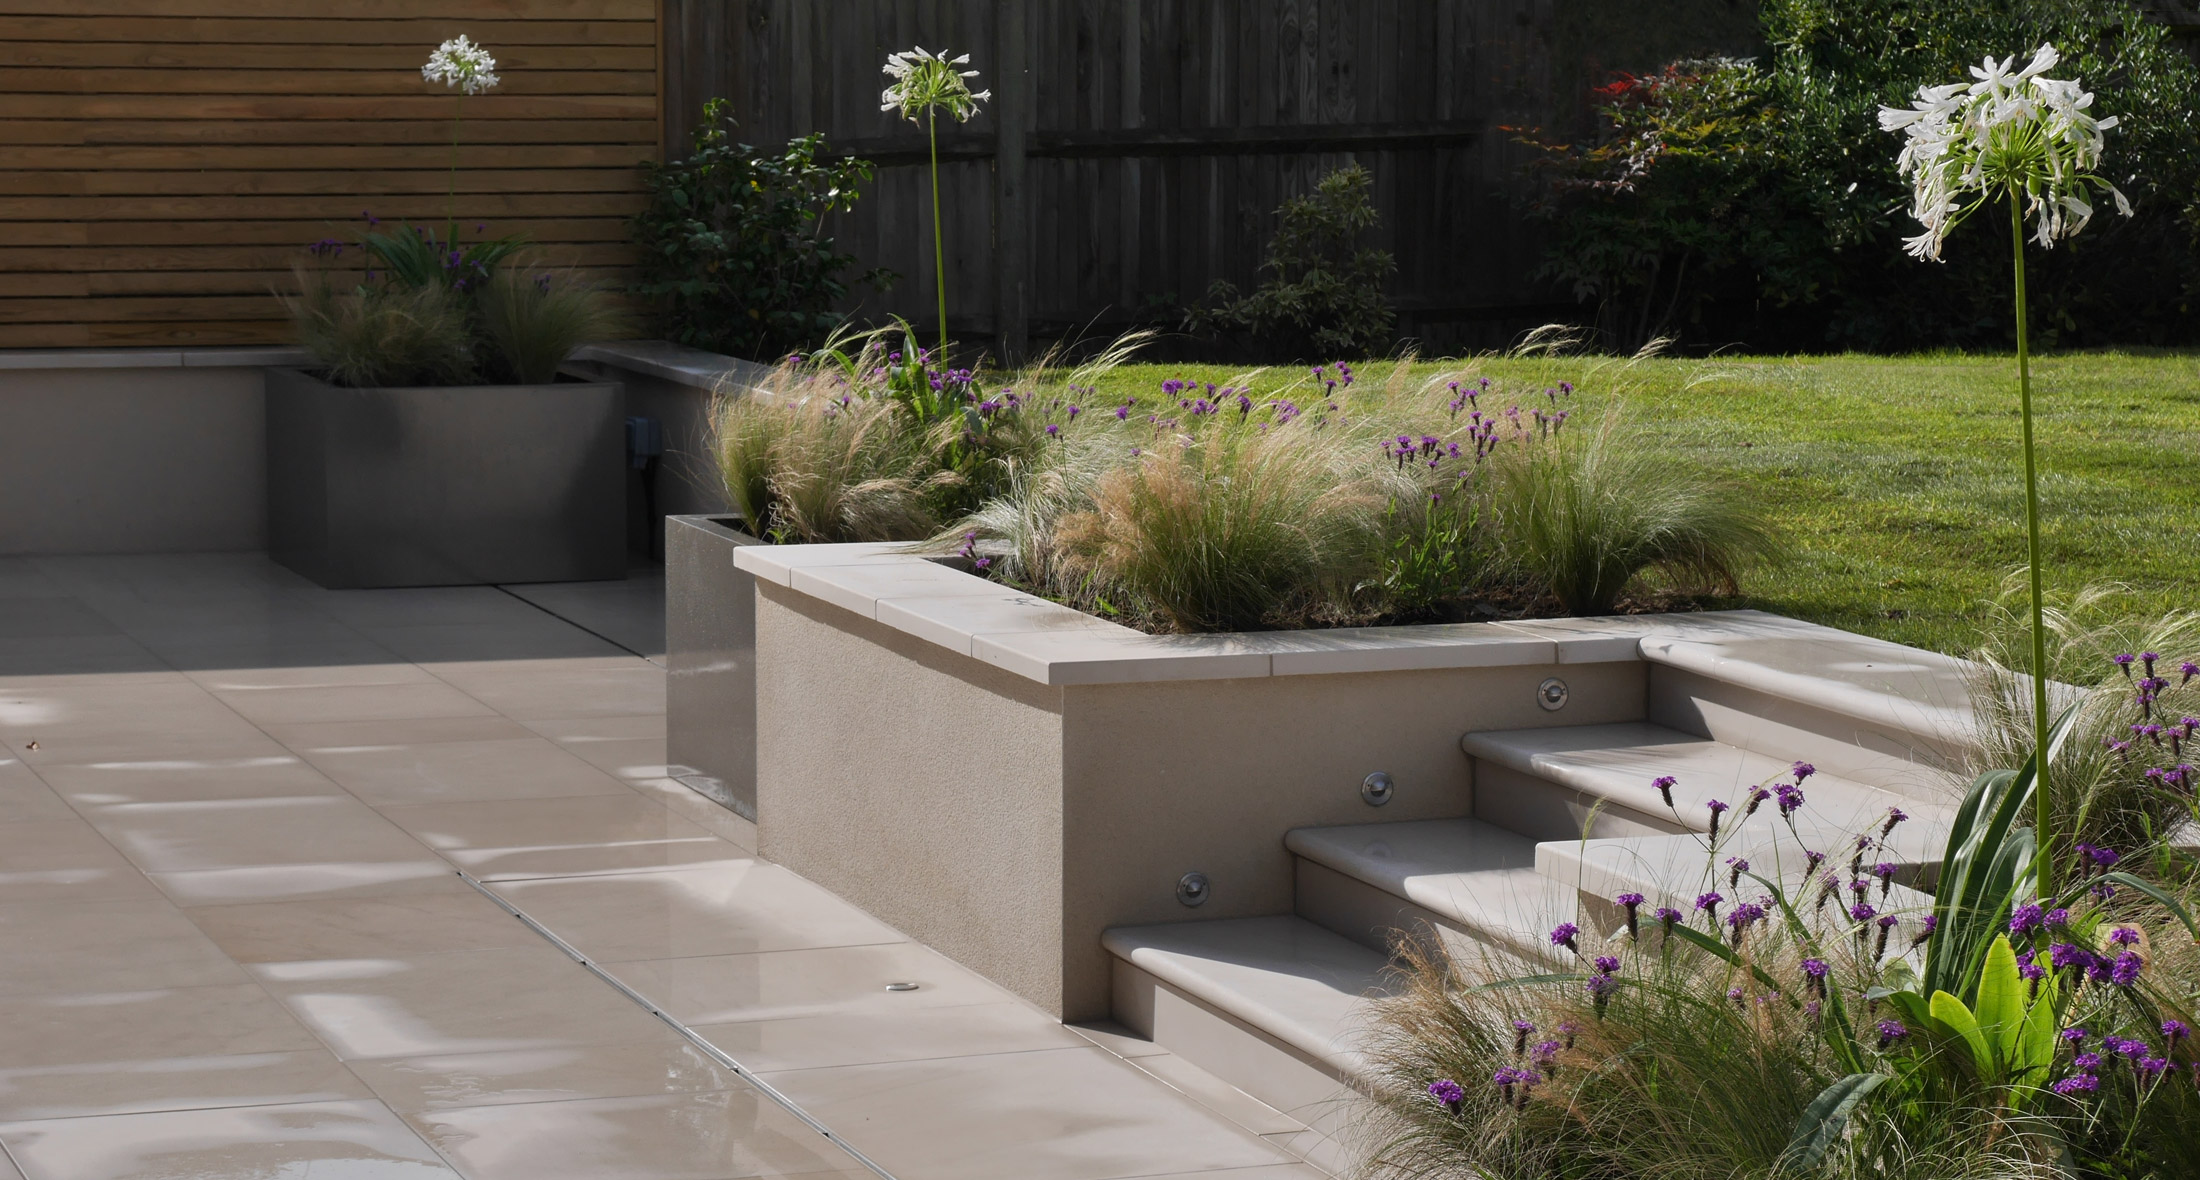 a slate grey garden design & landscaping patio showing raised edging and containers